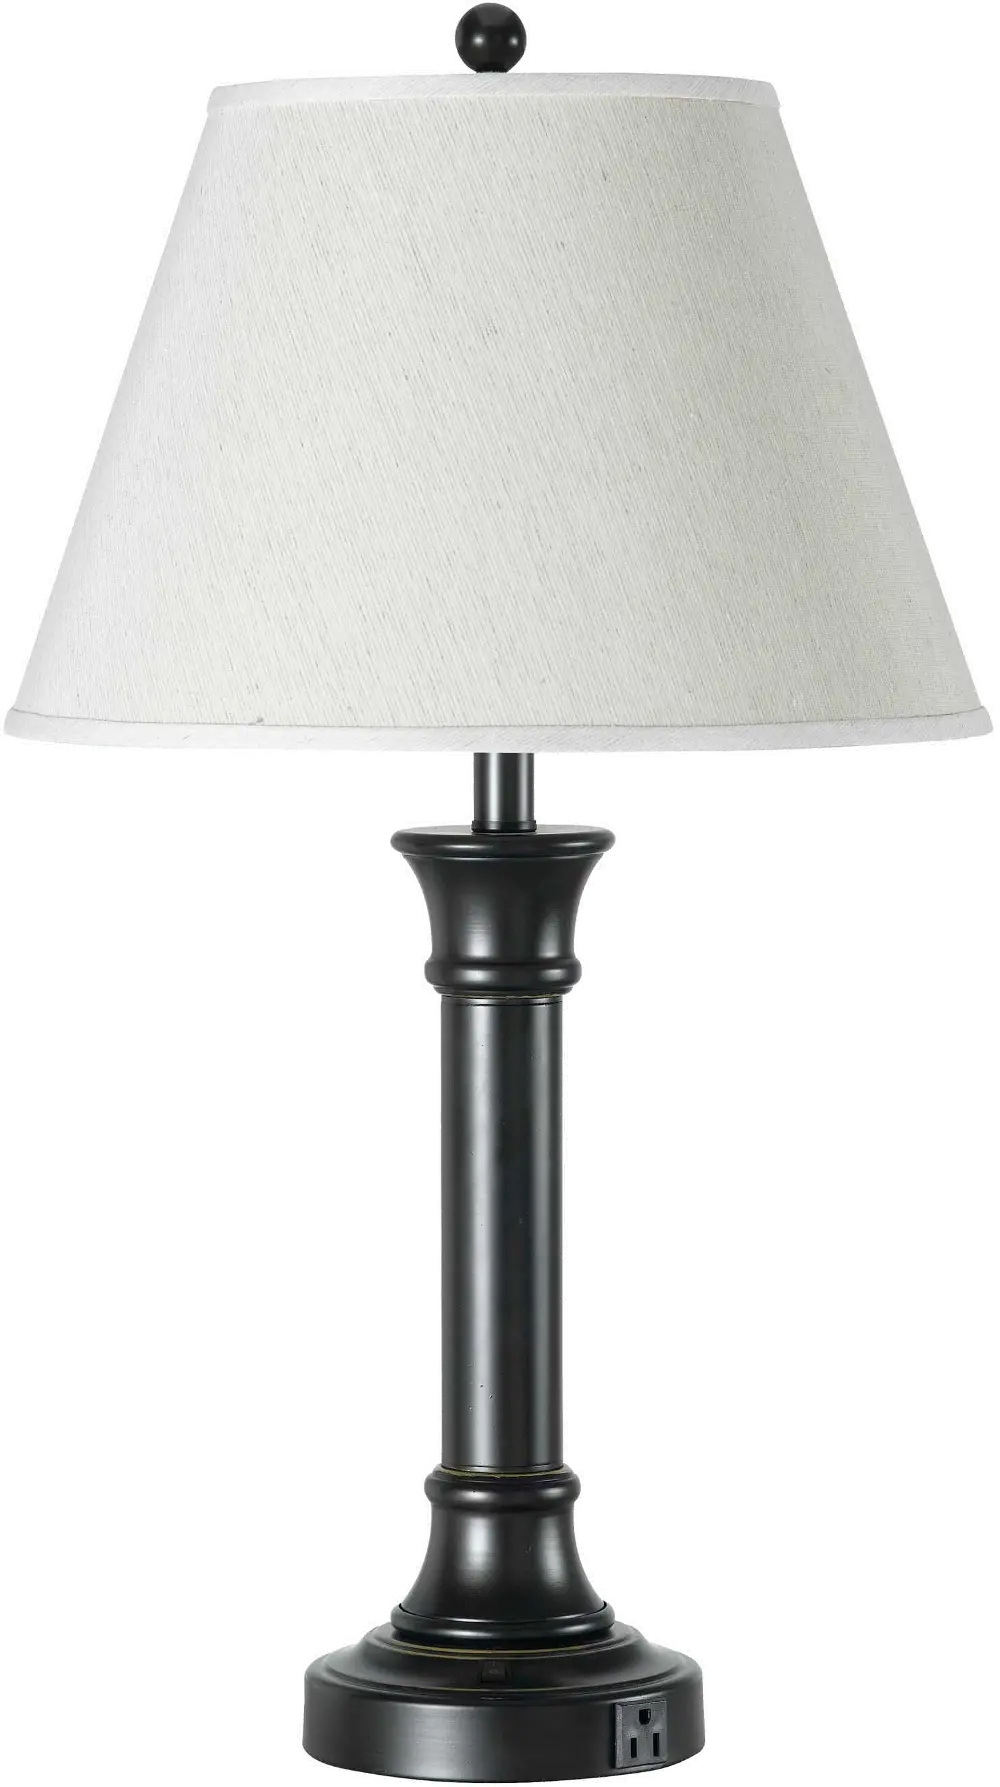 Metal Table Lamp with 2 Built-In Power Outlets-1